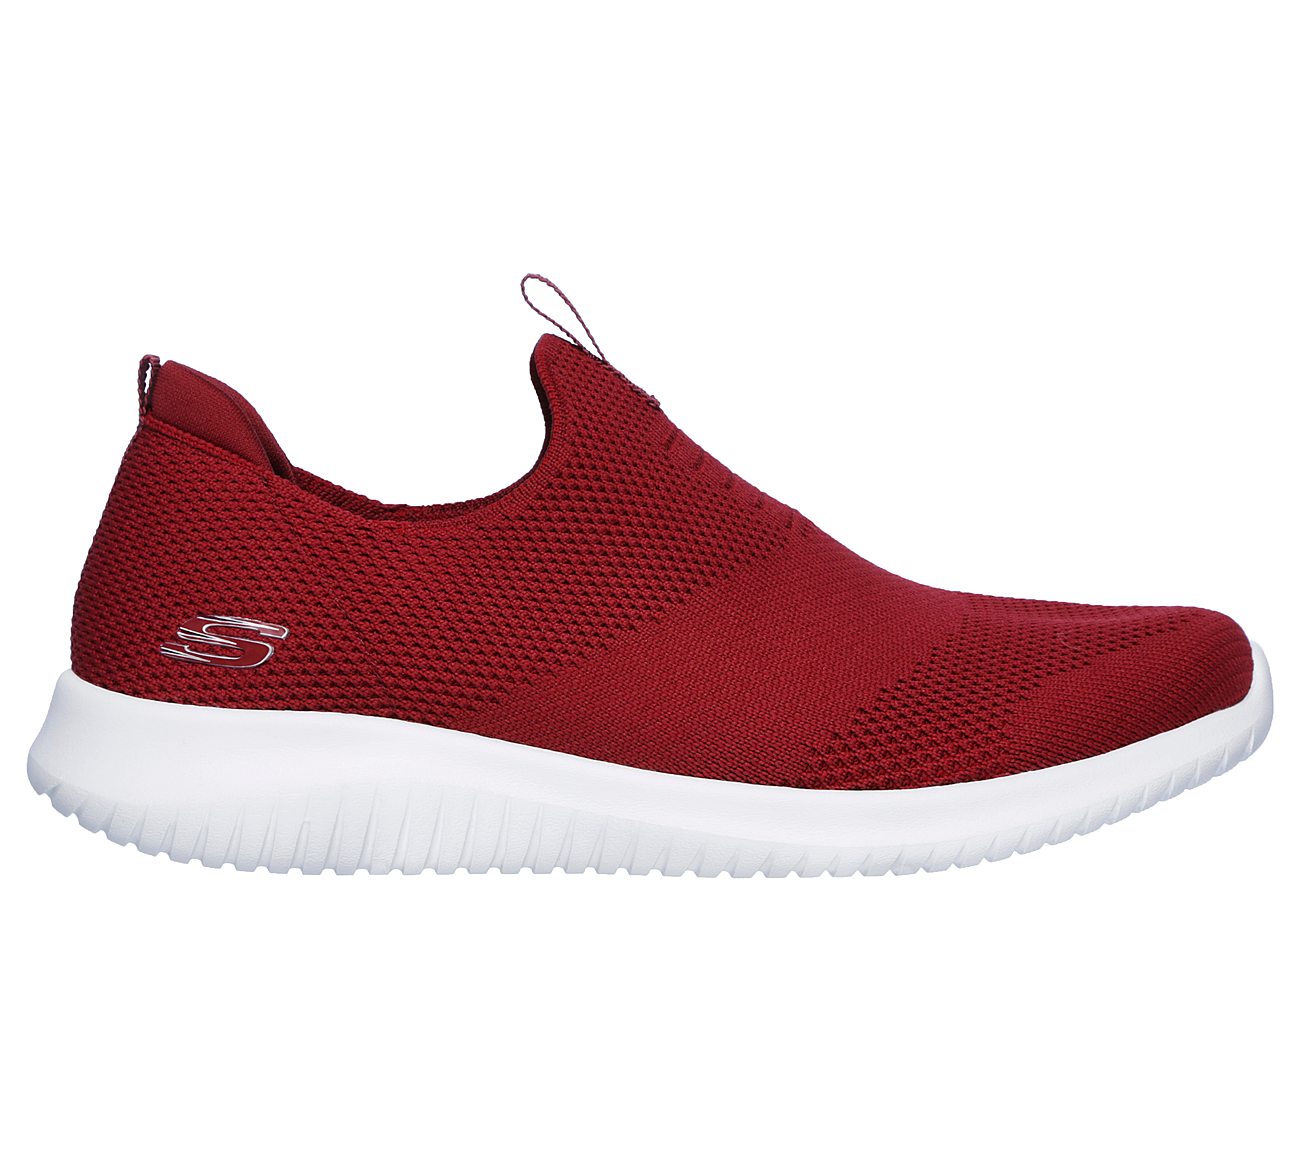 skechers mesh shoes mens Sale,up to 60 